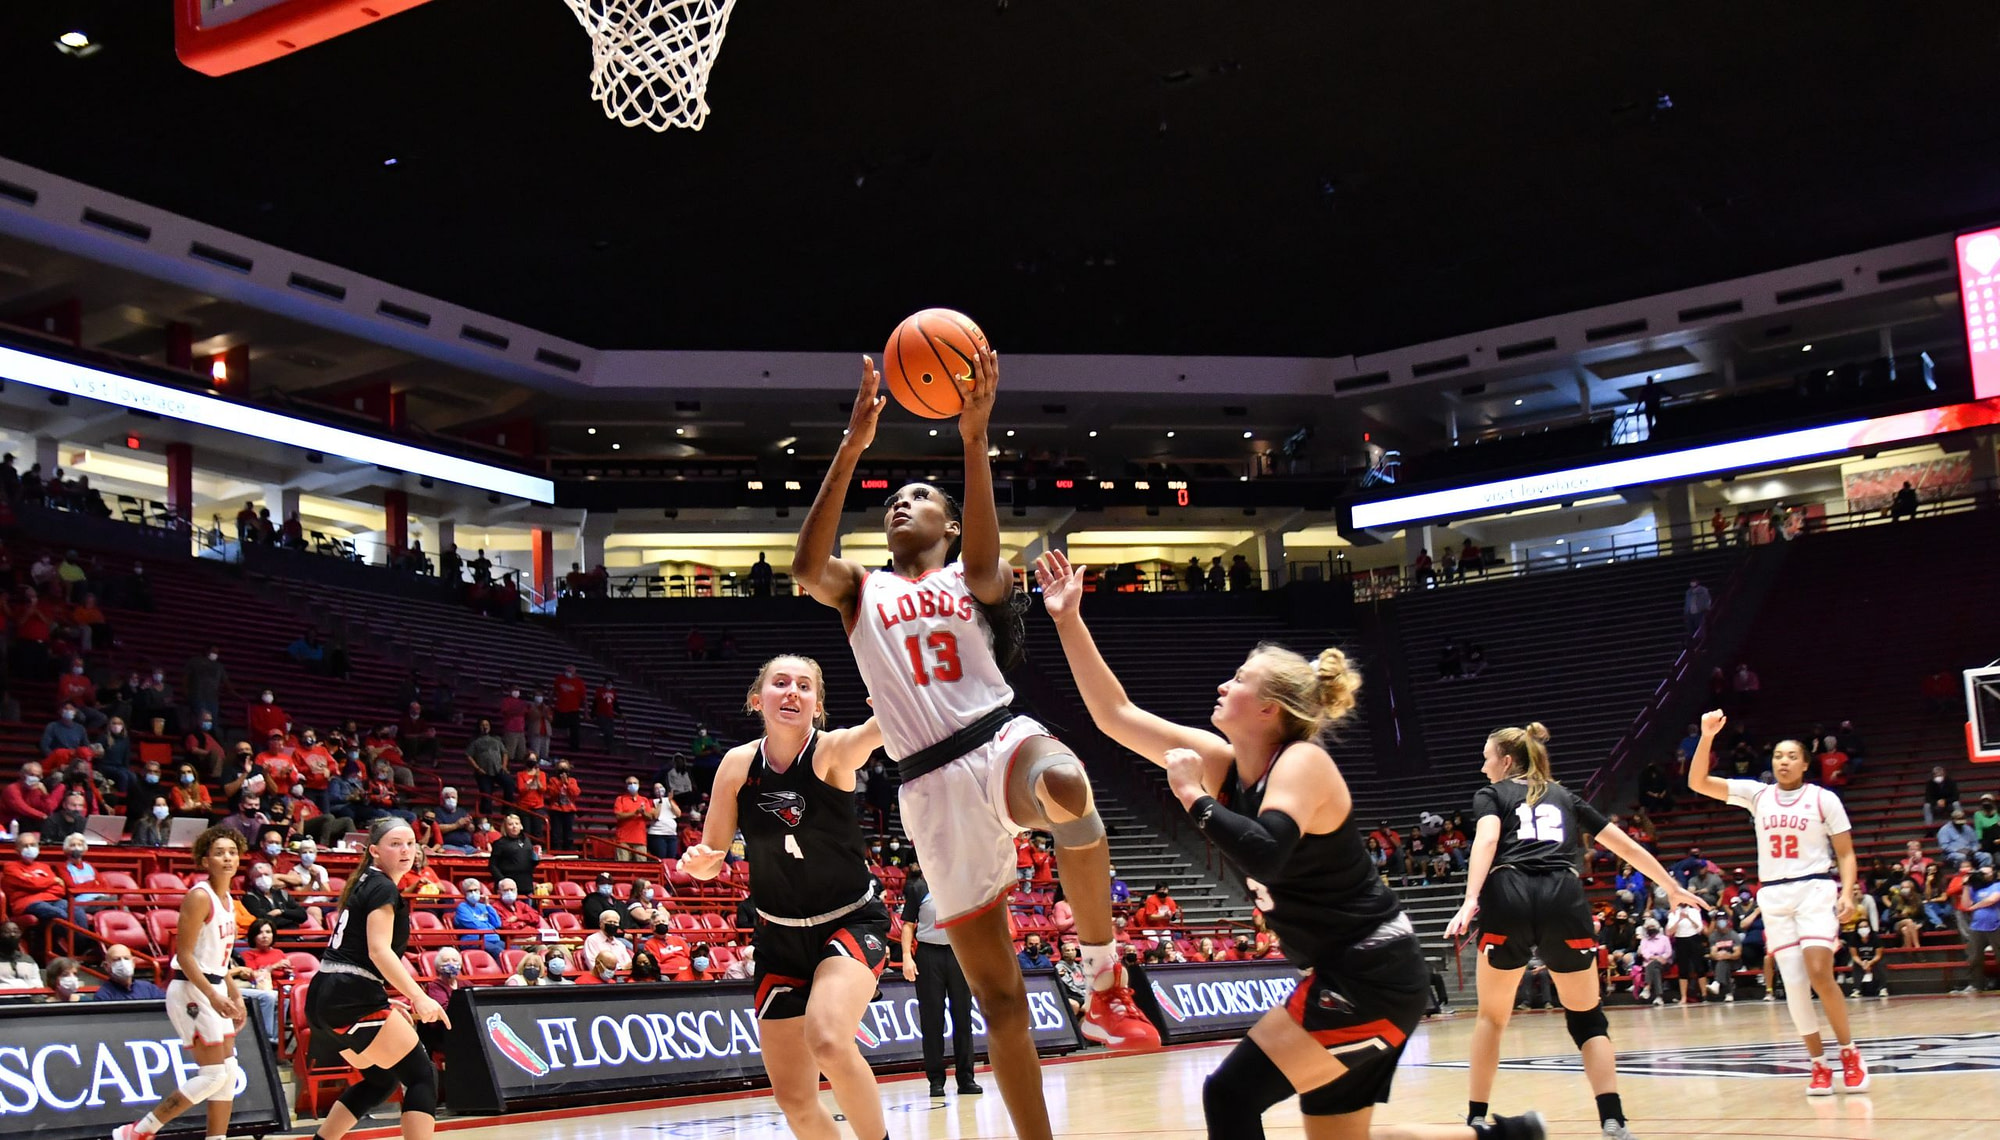 Lobos defeat Western Colorado 94-53 in first exhibition game. Some Observations.